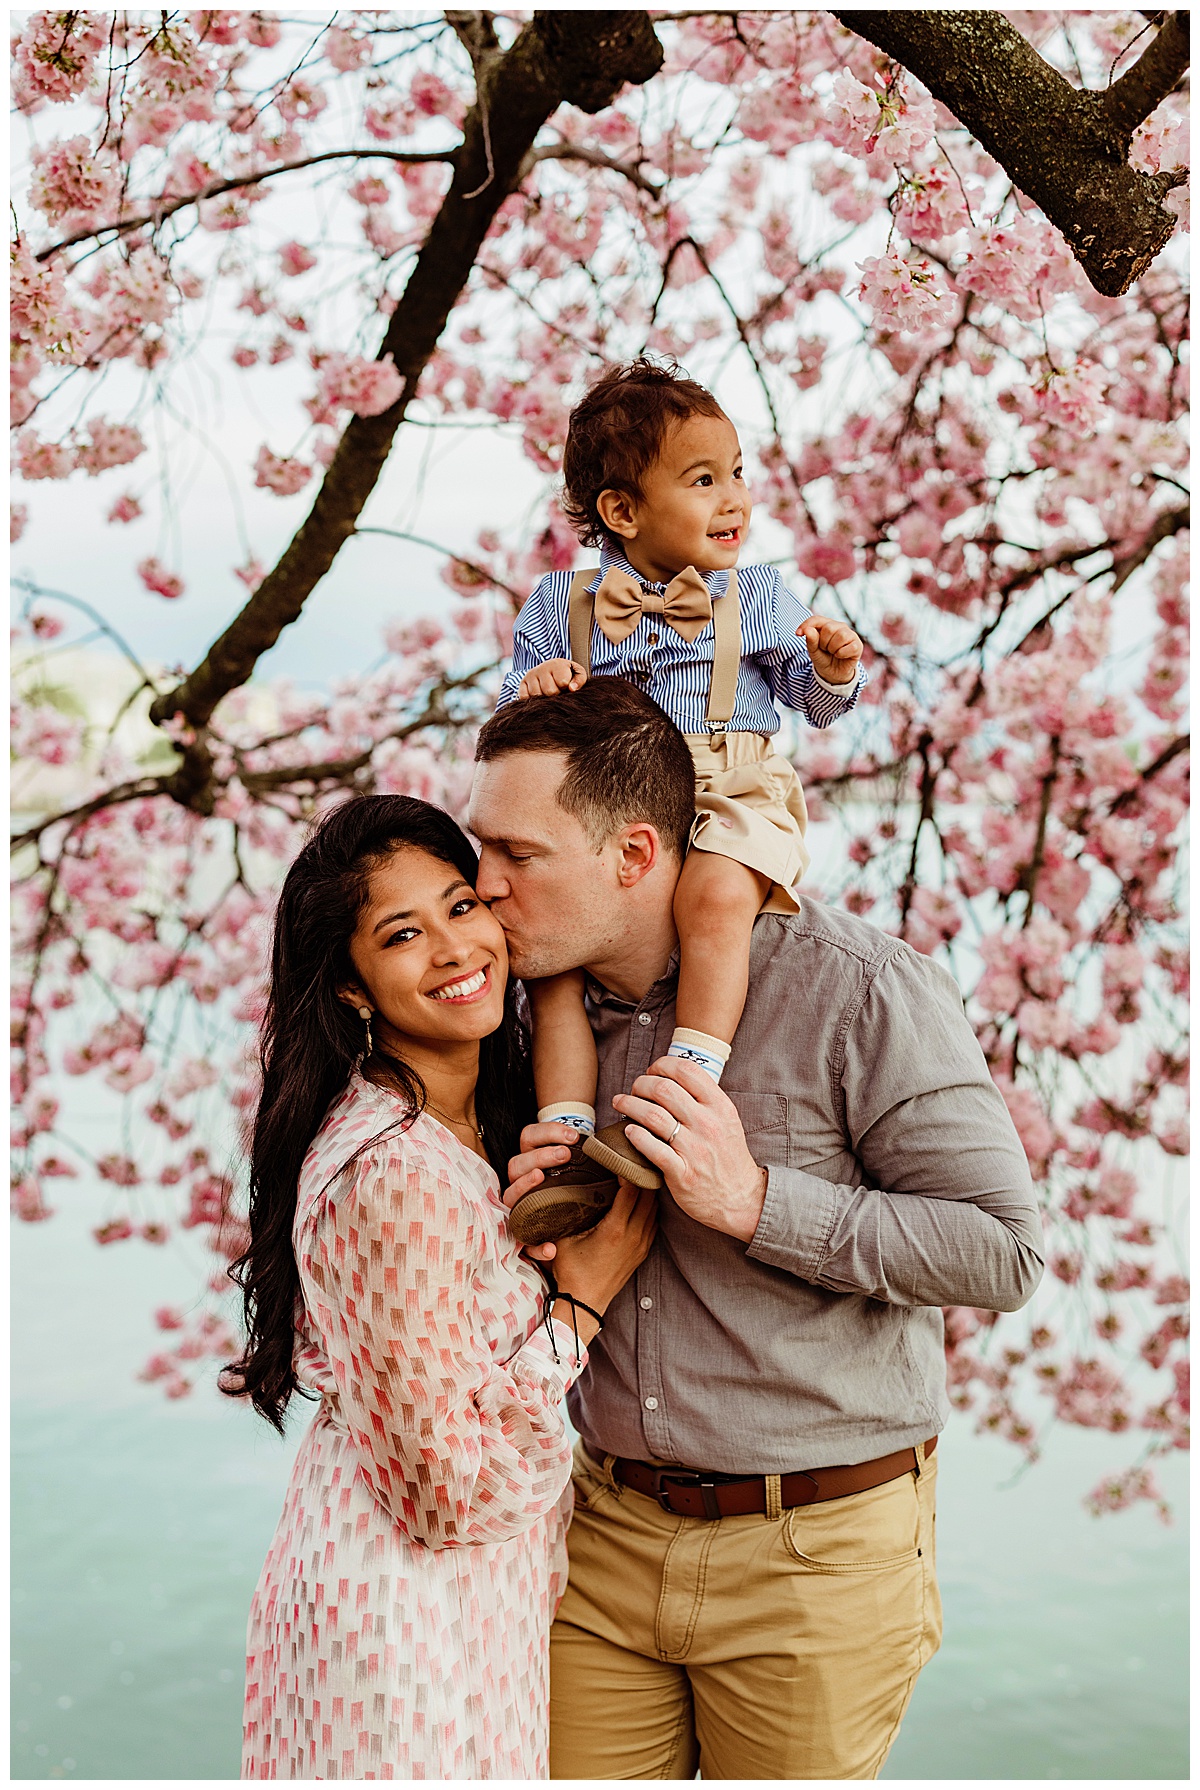 Little boy rides on dads shoulders in the Cherry Blossoms for Norma Fayak Photography